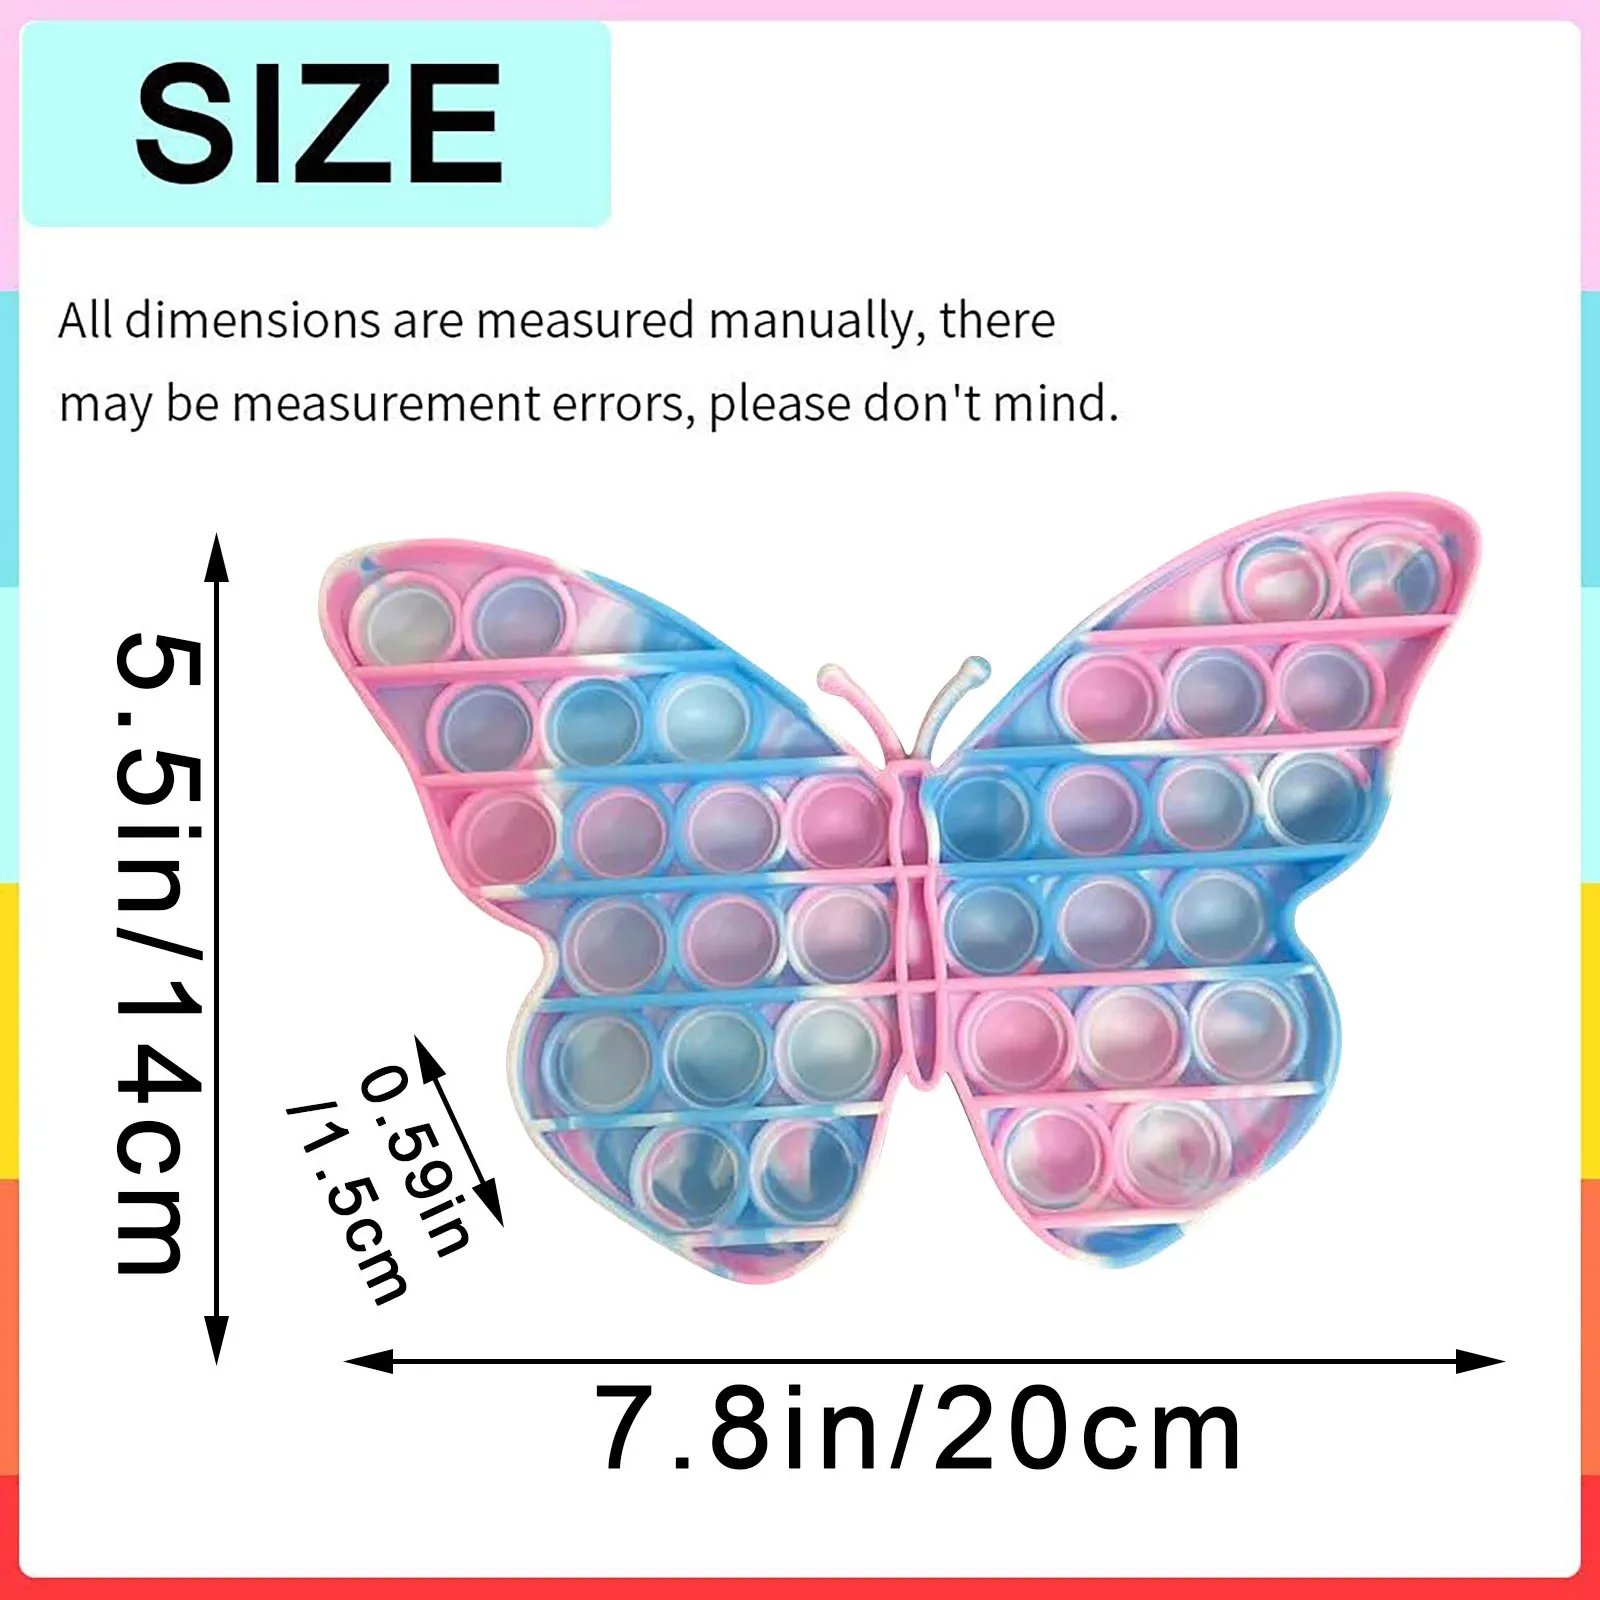 Butterfly Bubble Pops Fidget Kids Toy Sensory Autisim Special Need Its Anti-stress Stress Relief Squishy Fidget Toy For Kids atomic nee dohs